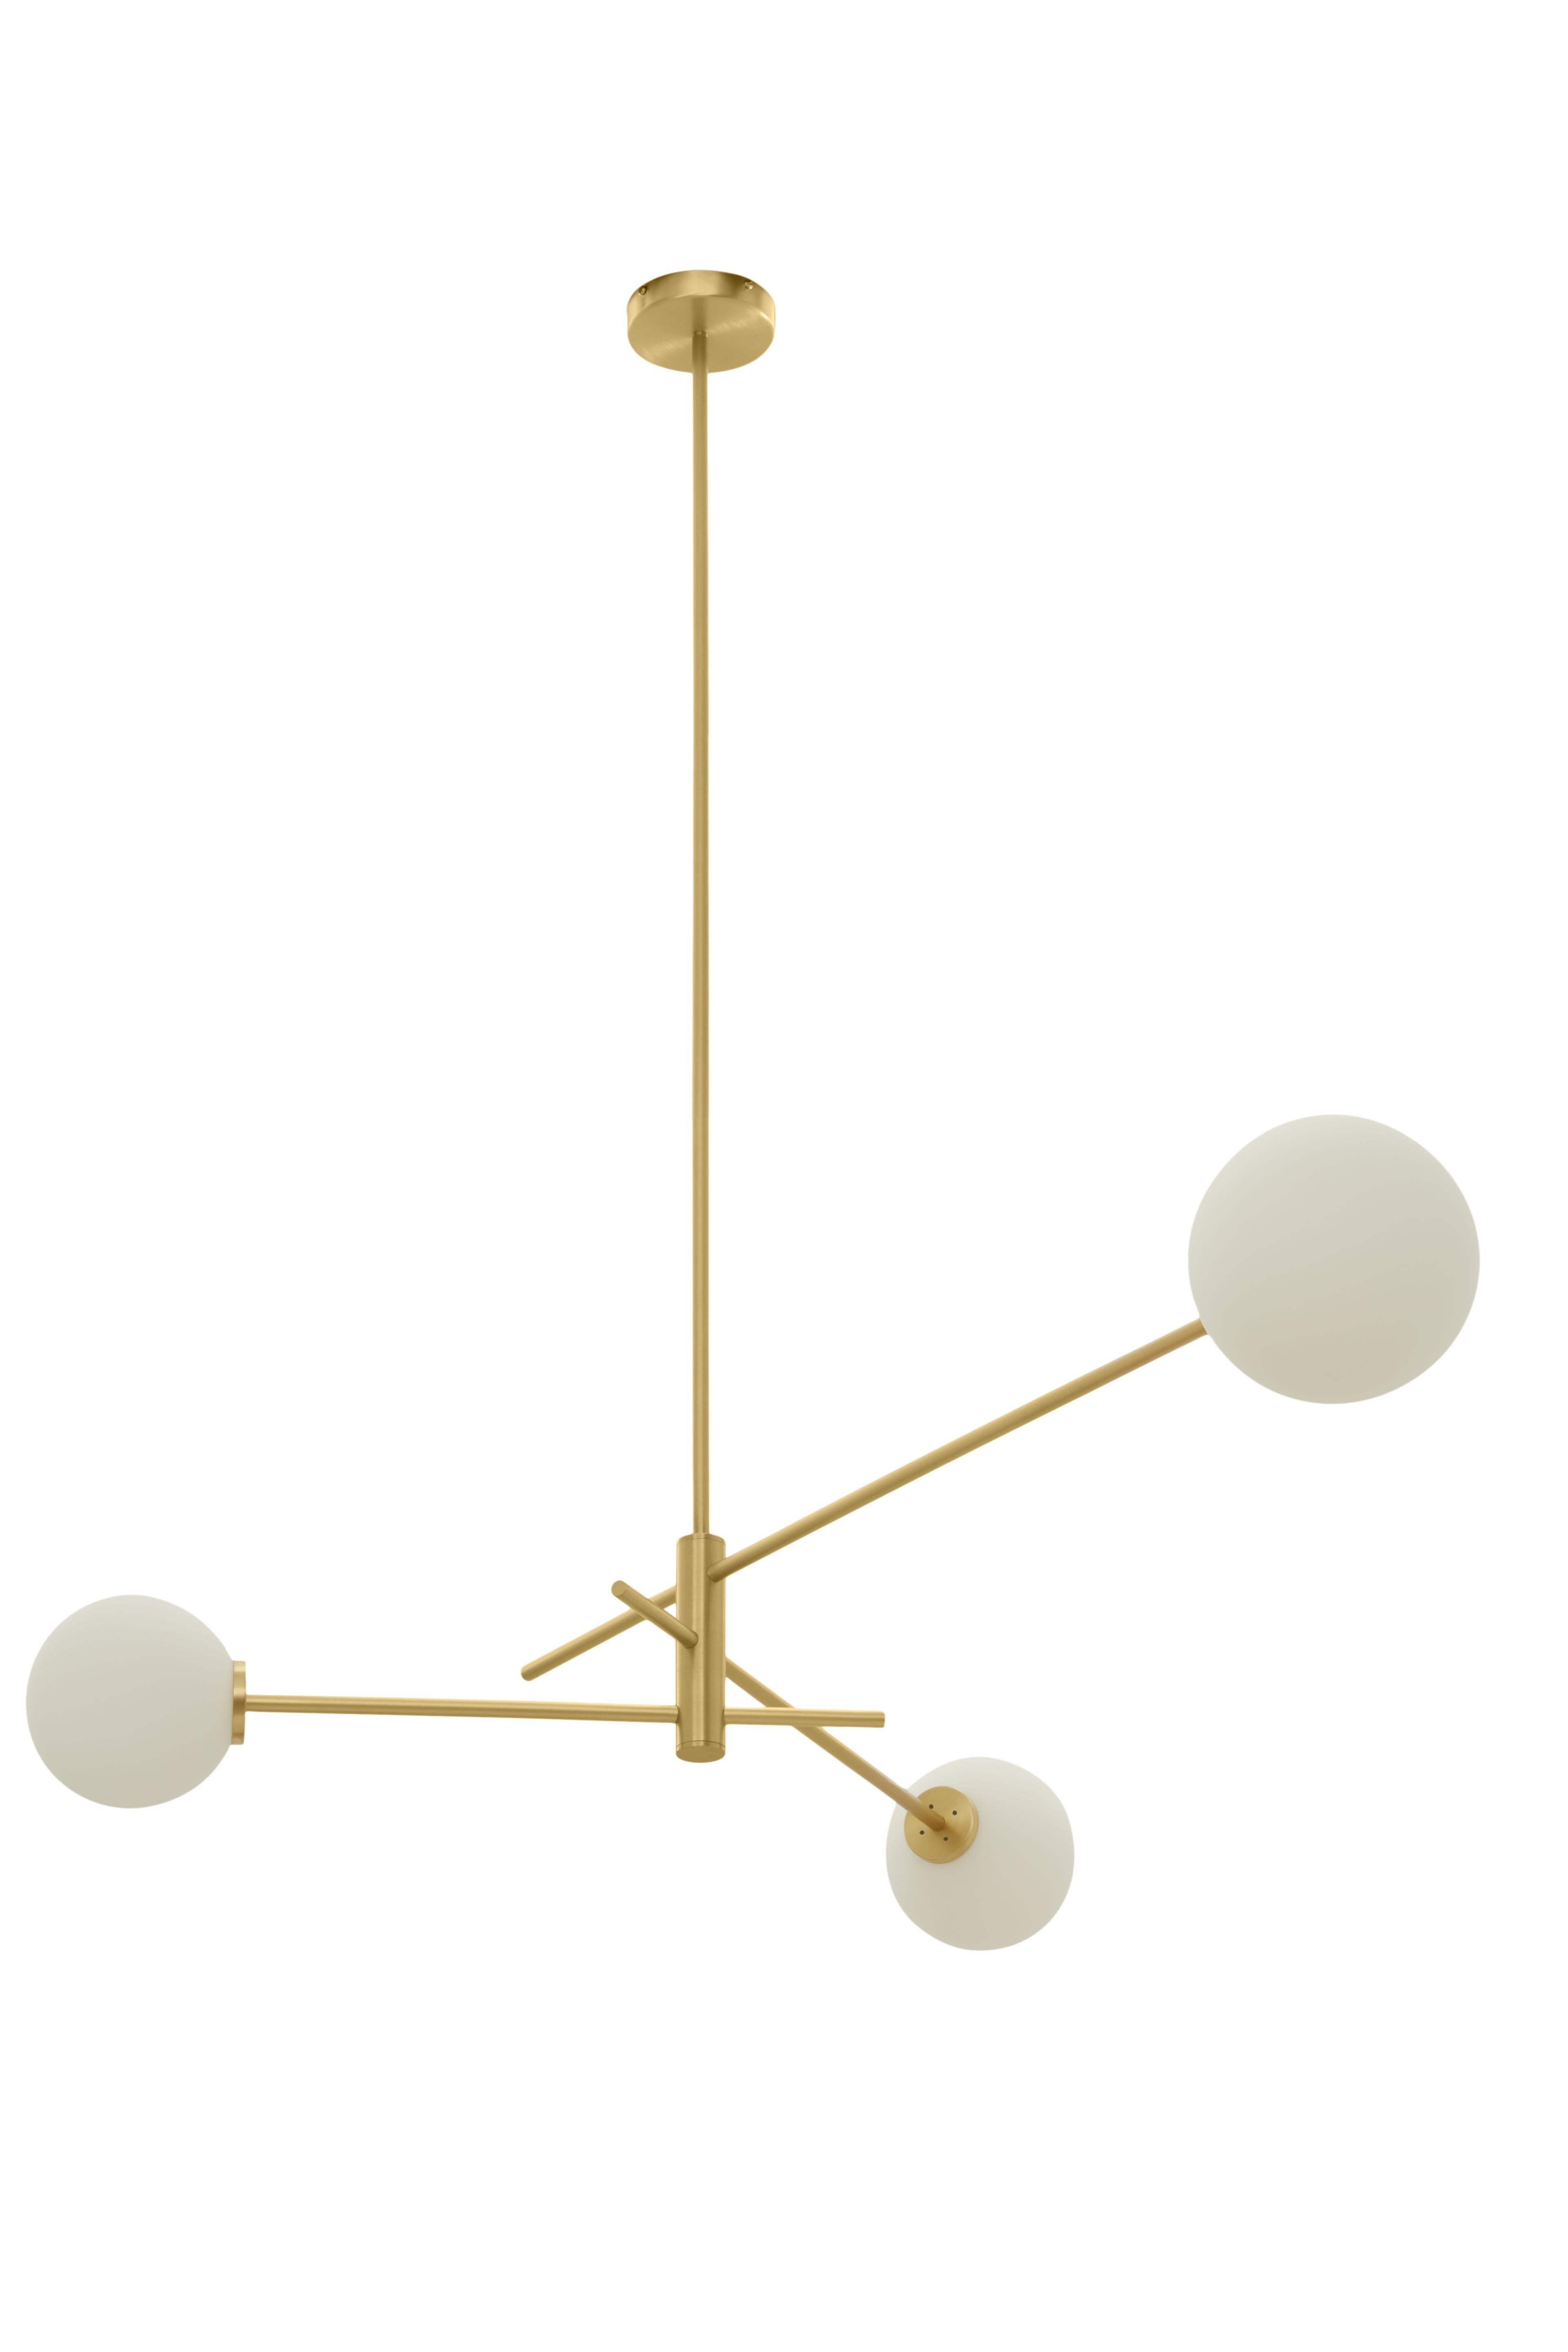 Trevi three pendant by CTO Lighting
Materials: satin brass with matt opal glass shades
Also available in dark bronze with matt opal glass shades

Dimensions: H 25 x W 110 cm 

All our lamps can be wired according to each country. If sold to the USA